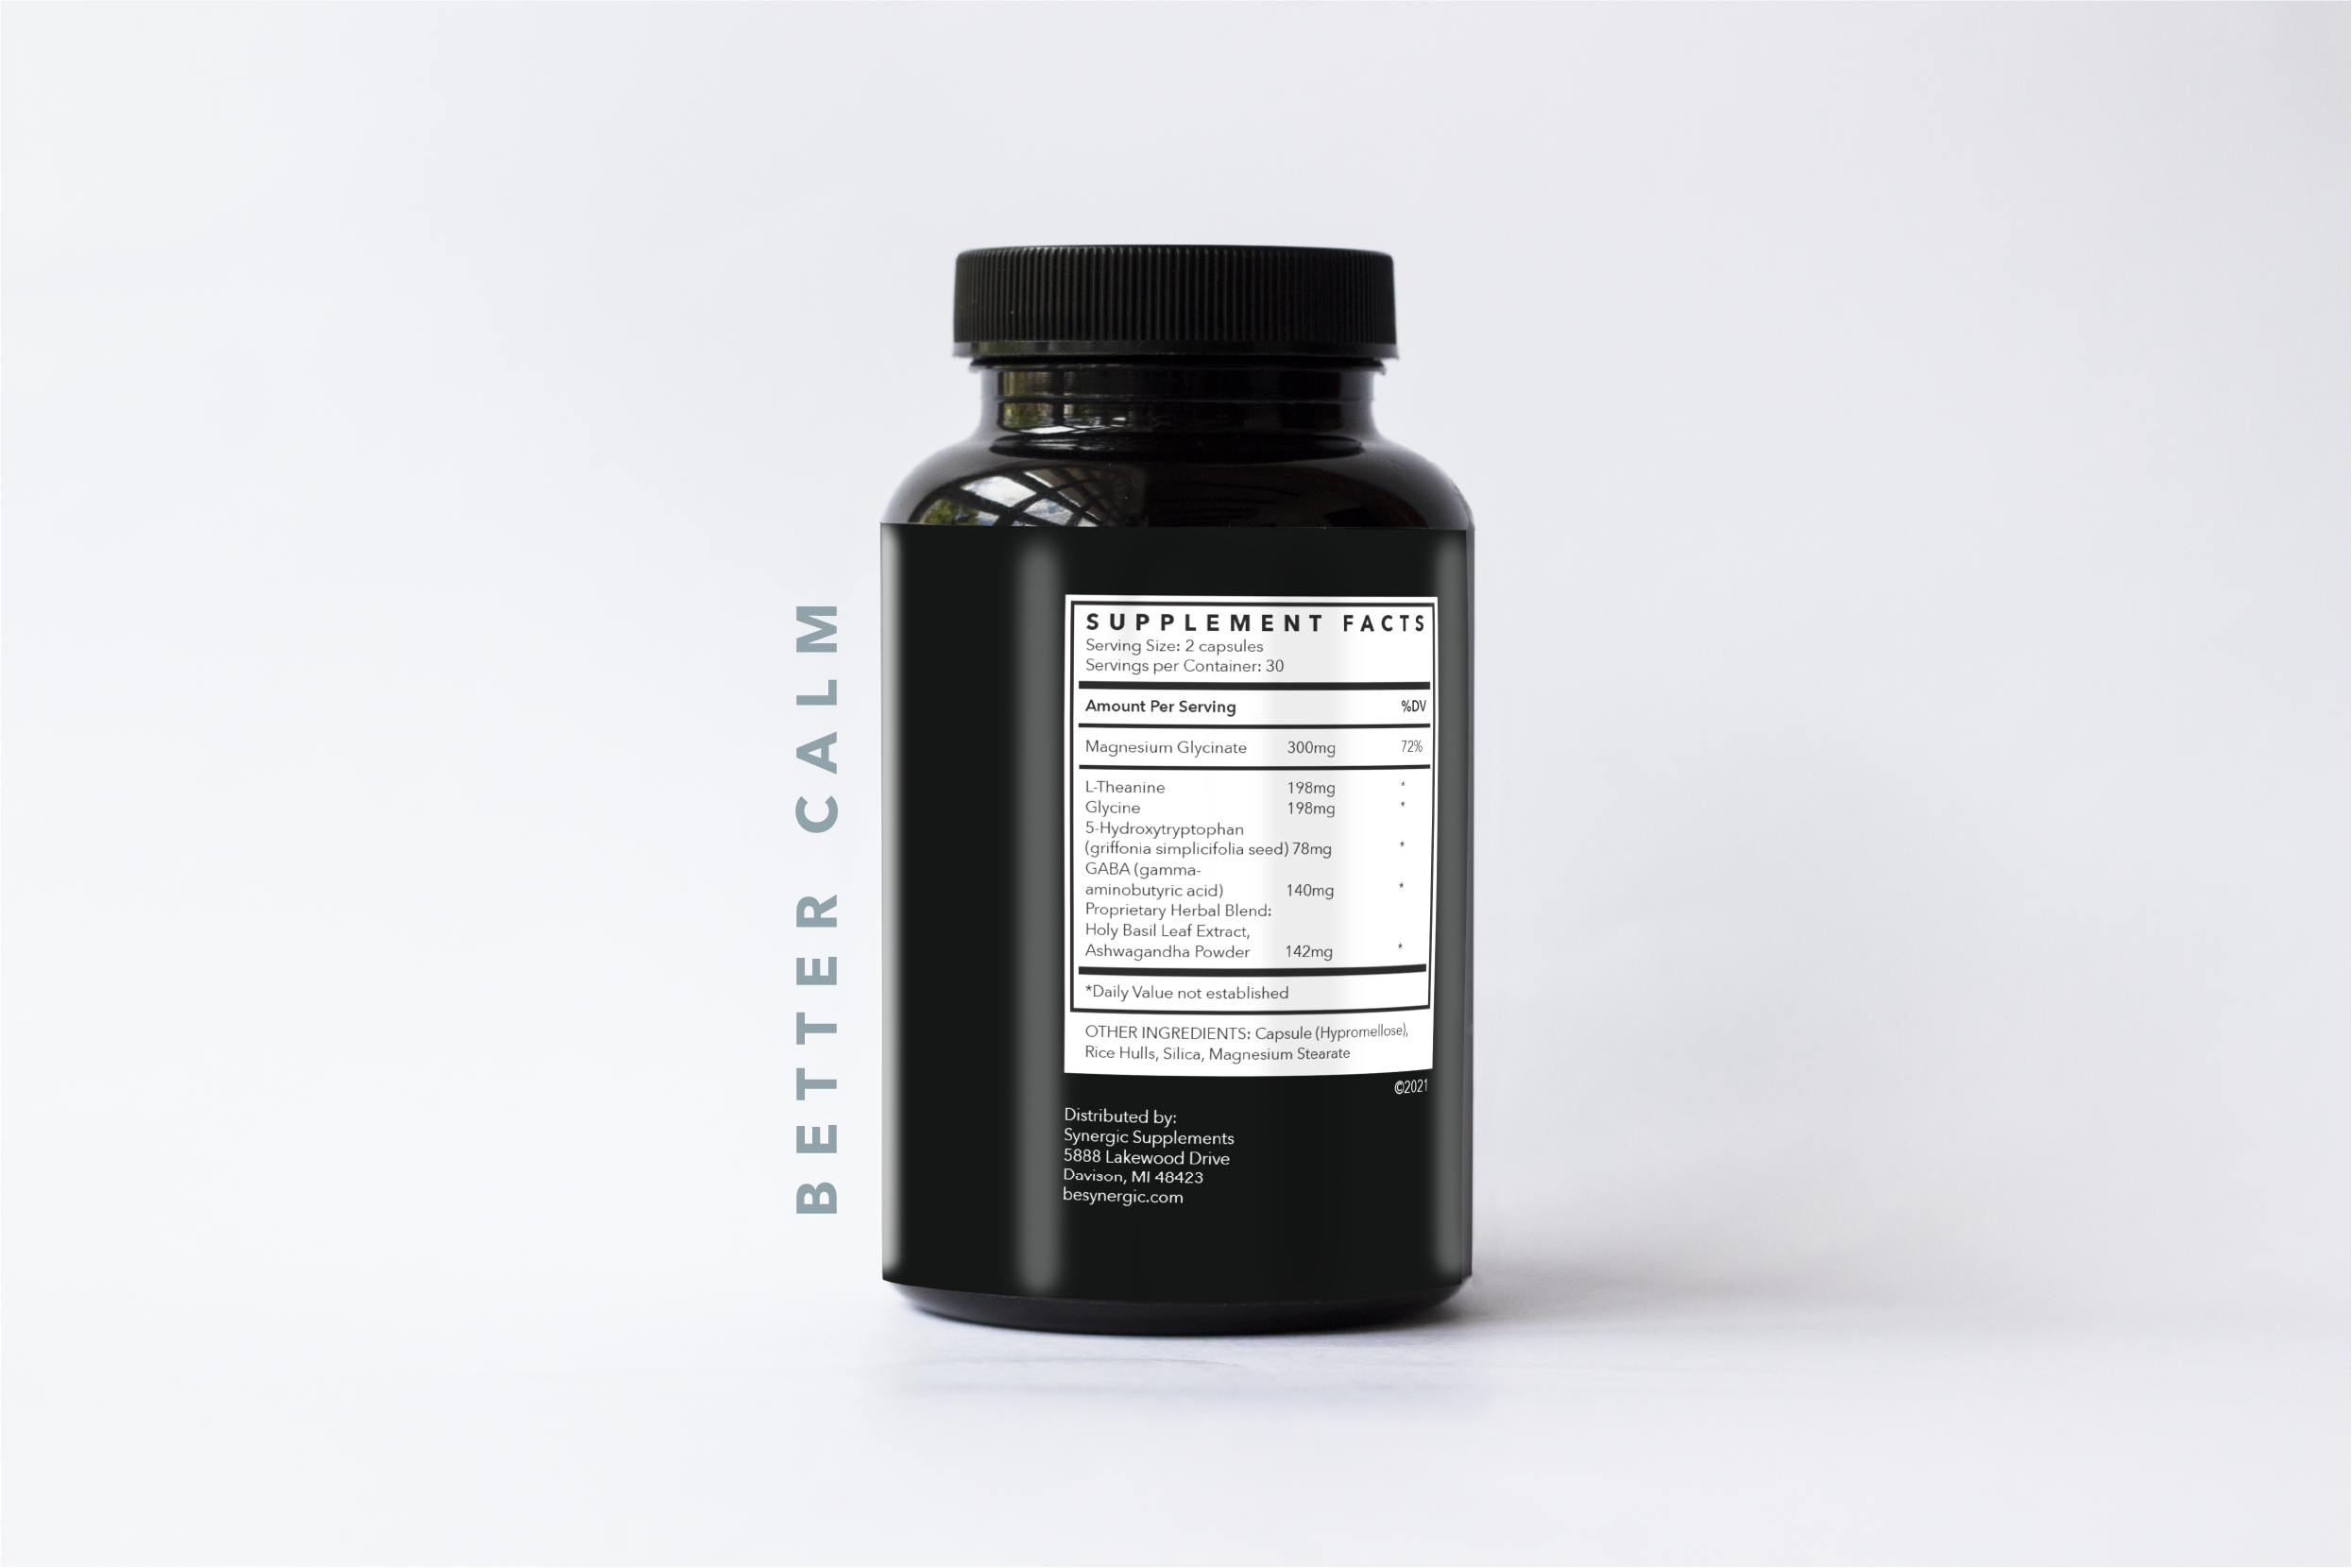 Supplement Facts of Better Calm Supplement/Balancer bottle by Synergic Supplements. Serving size: 2 capsules, Serving Size per Container: 30 Contains Magnesium Glycinate 300mg, L-Theanine 198mg, Glycine 198mg, 5-Hydroxytryptophan 78mg, GABA 140mg, Propriety Herbal Blend: Holy basil and Ashwagandha Powder 142mg. Other ingredients: Capsule (hypromellose), Rice Hulls, Silica, Magnesium. Stearate Distributed by Synergic Supplemen